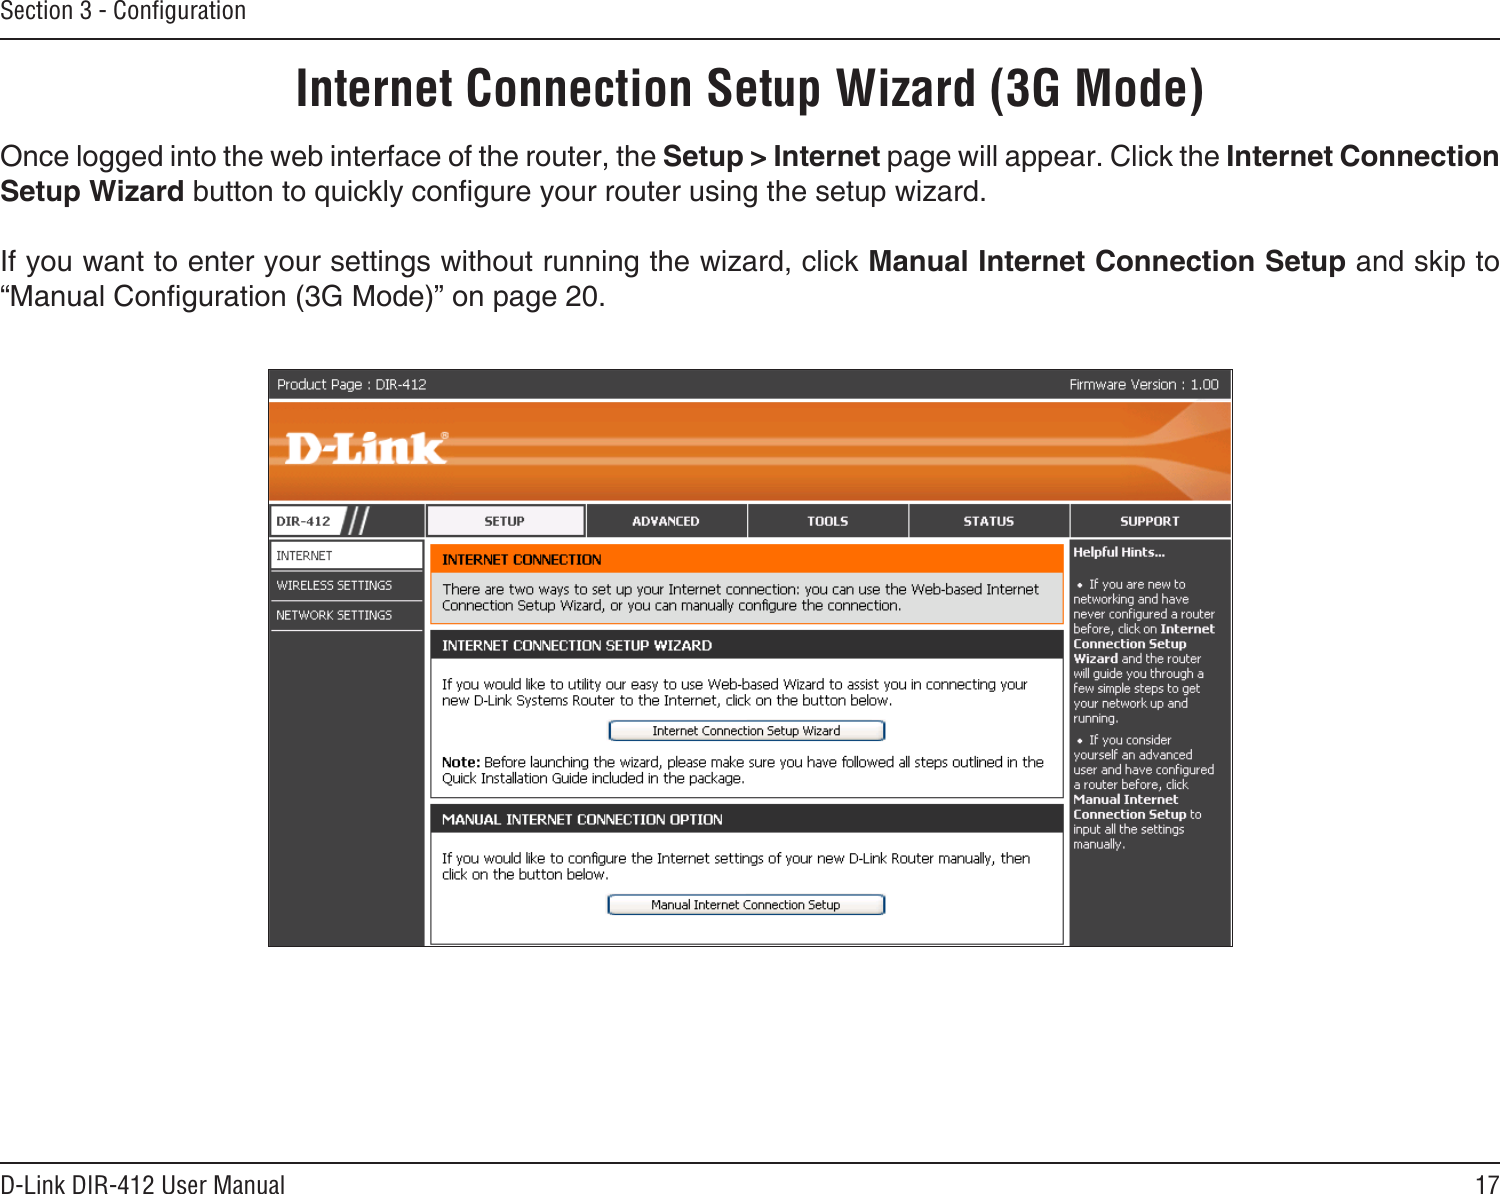 17D-Link DIR-412 User ManualSection 3 - ConﬁgurationInternet Connection Setup Wizard (3G Mode)Once logged into the web interface of the router, the Setup &gt; Internet page will appear. Click the Internet Connection Setup Wizard button to quickly congure your router using the setup wizard.If you want to enter your settings without running the wizard, click Manual Internet Connection Setup and skip to “Manual Conguration (3G Mode)” on page 20.